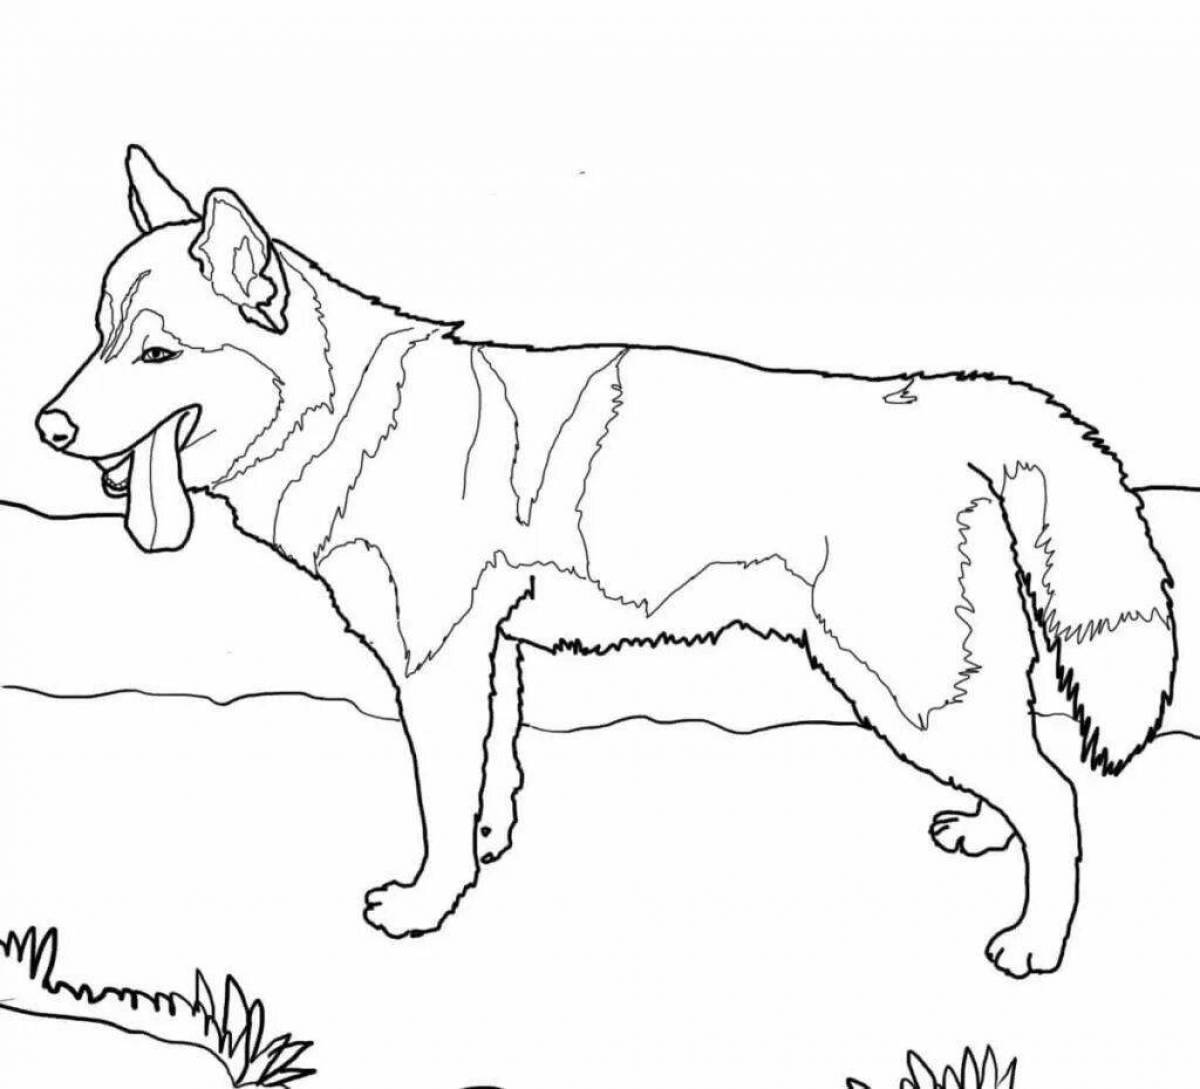 A fun husky coloring book for kids